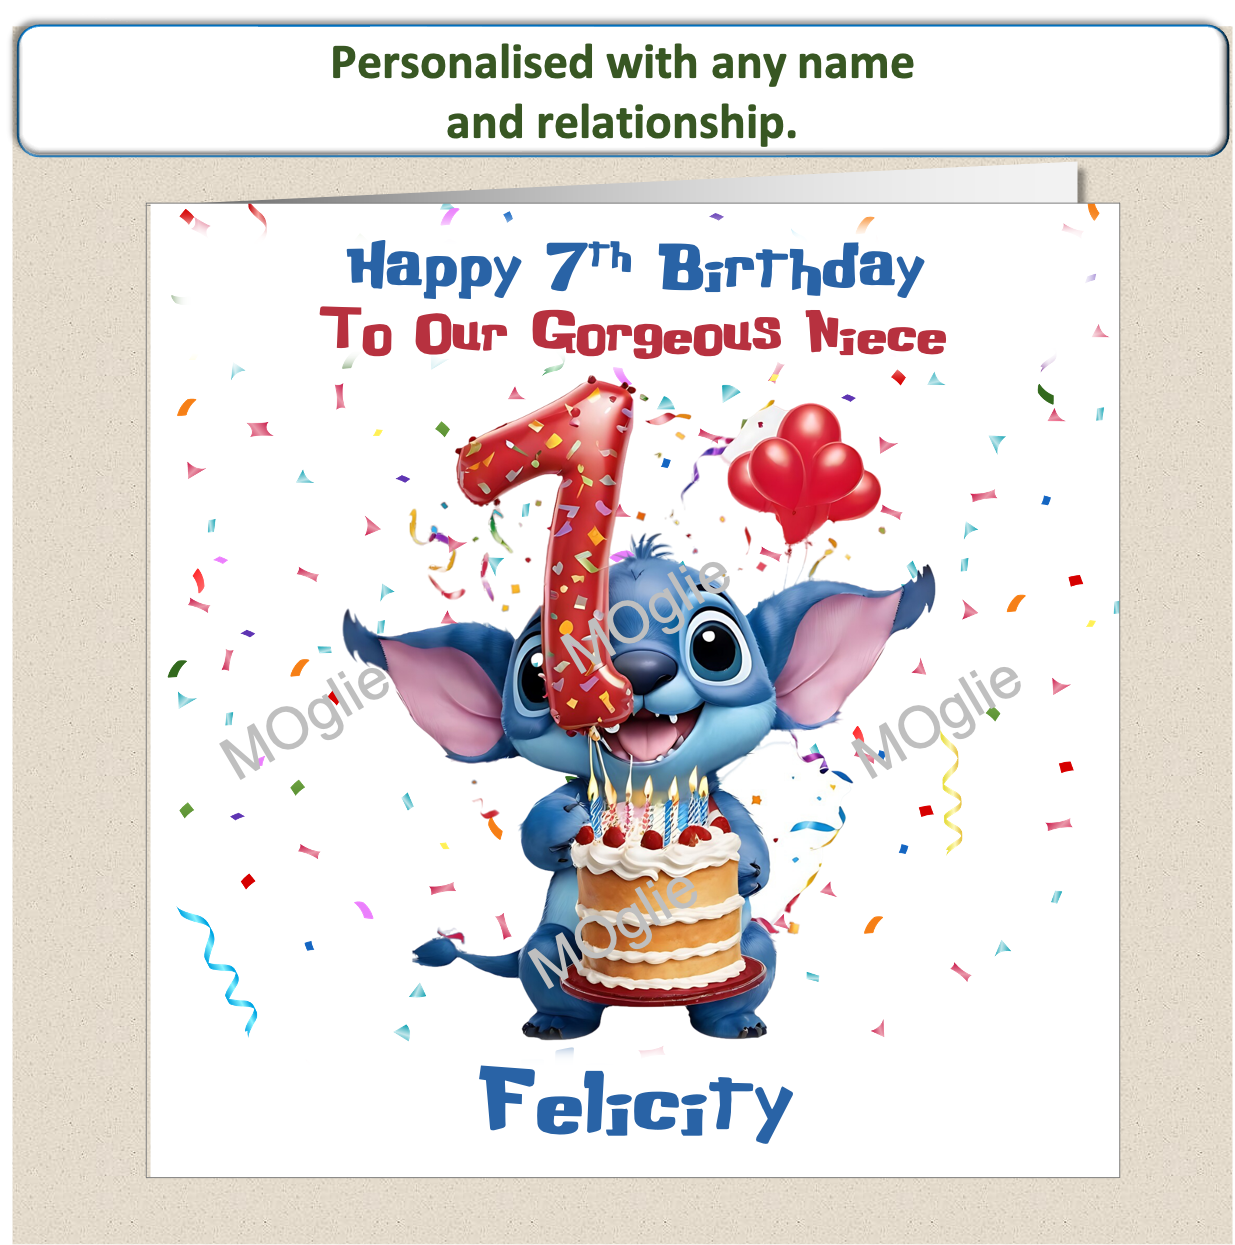 Personalised Lilo and Stitch 7th Birthday Cards with name and relationship